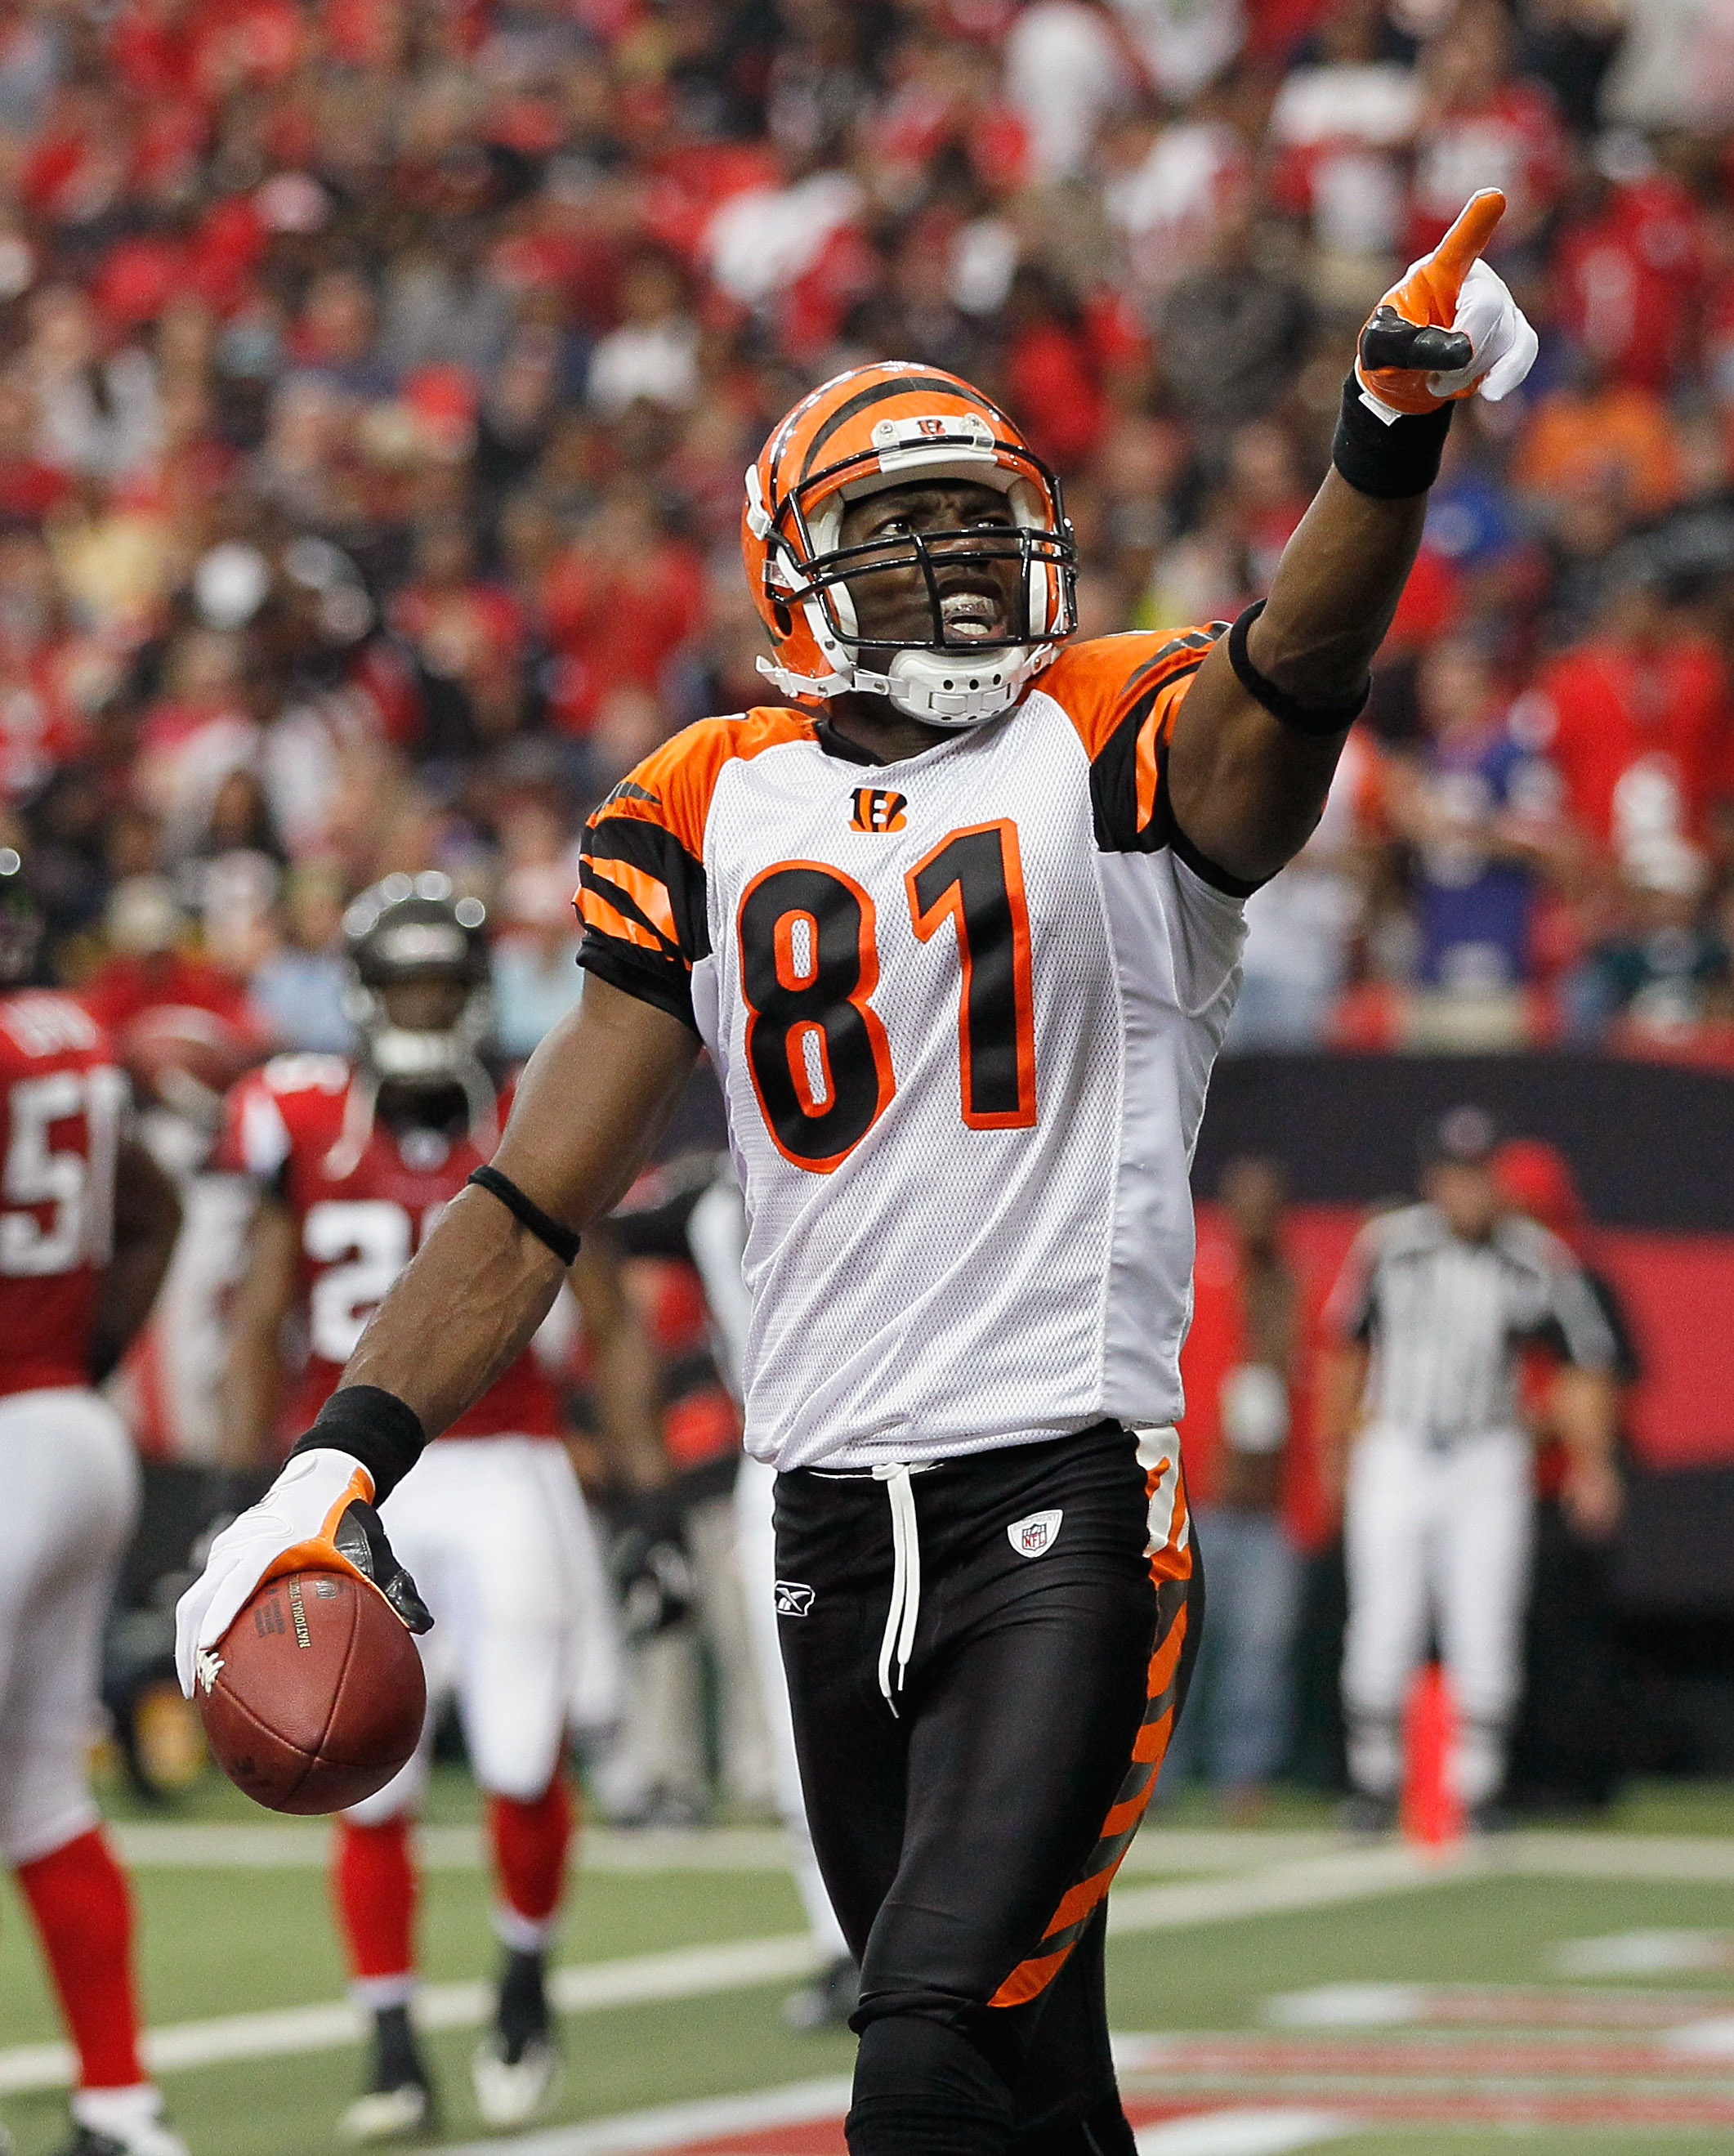 ATLANTA - OCTOBER 24:  Terrell Owens #81 of the Cincinnati Bengals celebrates his touchdown against the Atlanta Falcons at Georgia Dome on October 24, 2010 in Atlanta, Georgia.  (Photo by Kevin C. Cox/Getty Images)